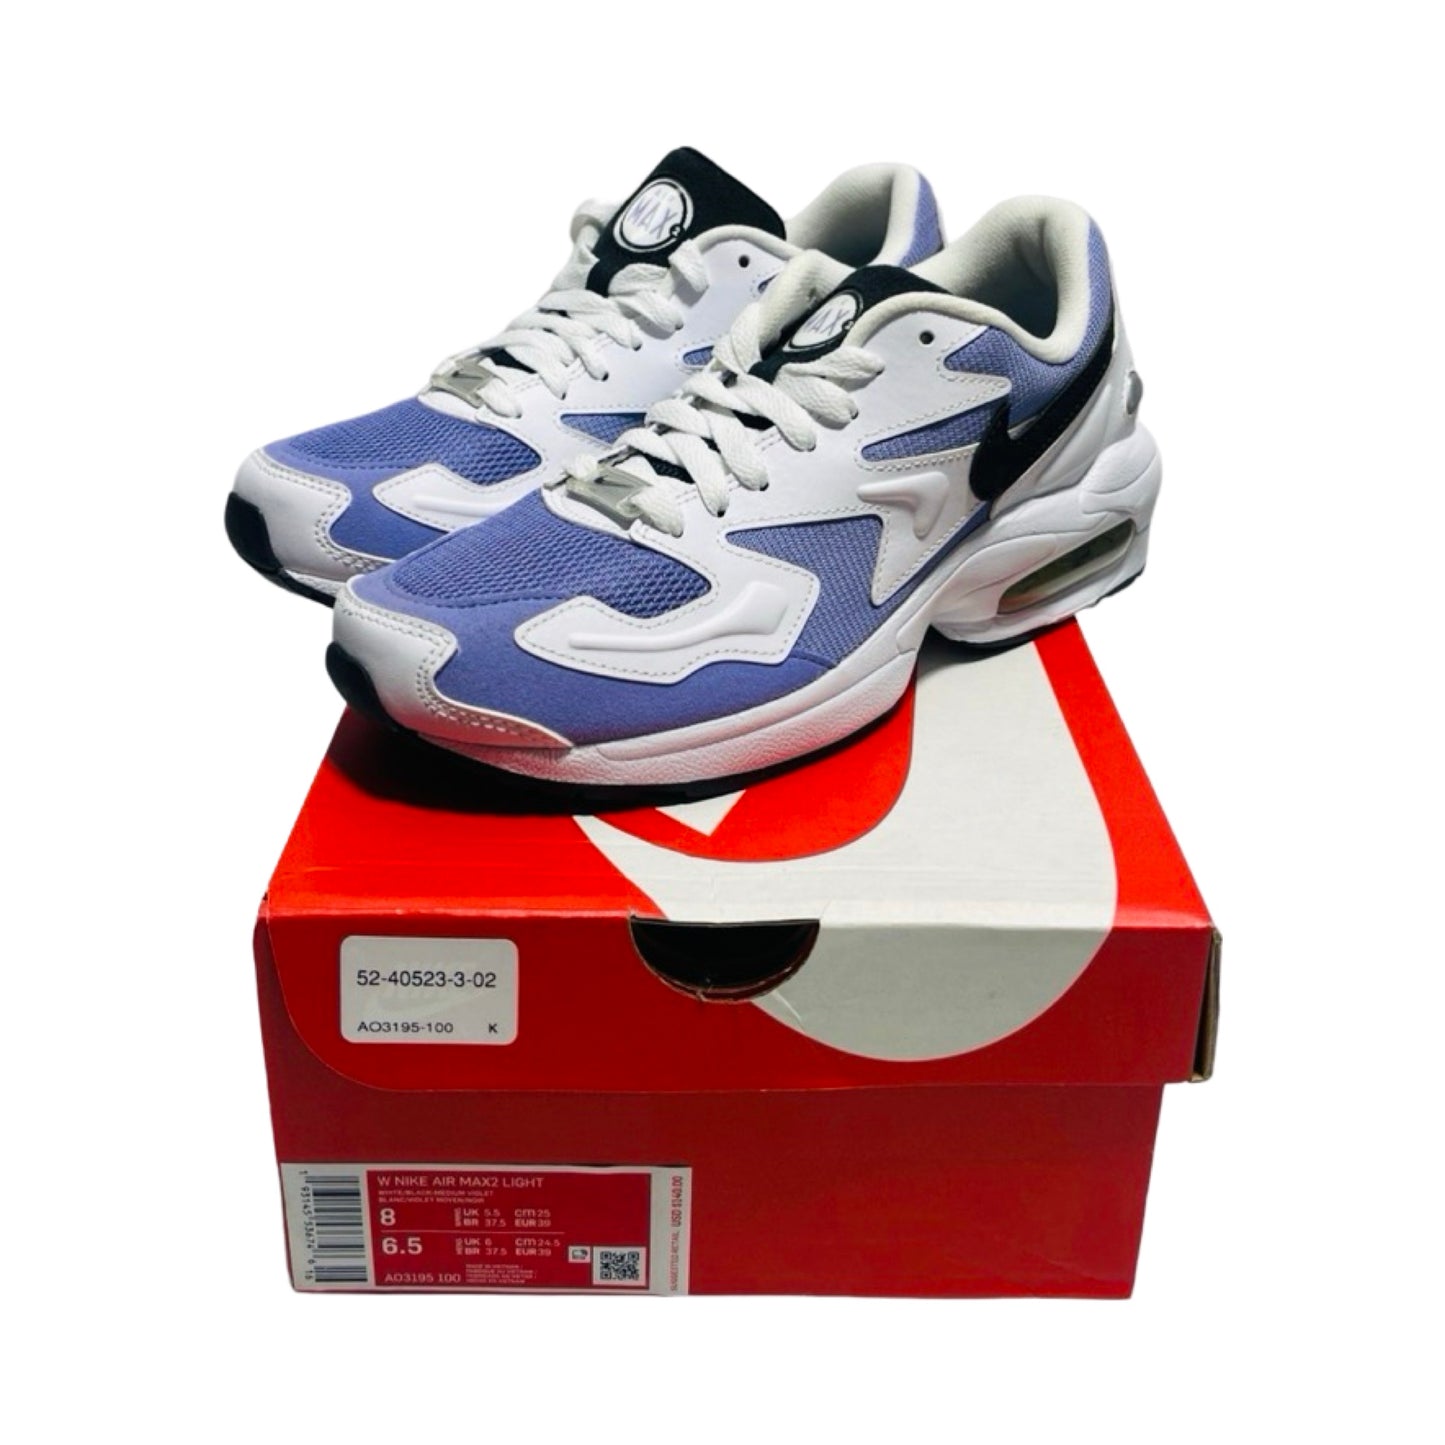 Air Max2 Light White/Black Medium Violet Shoes Athletic By Nike  Size: 8